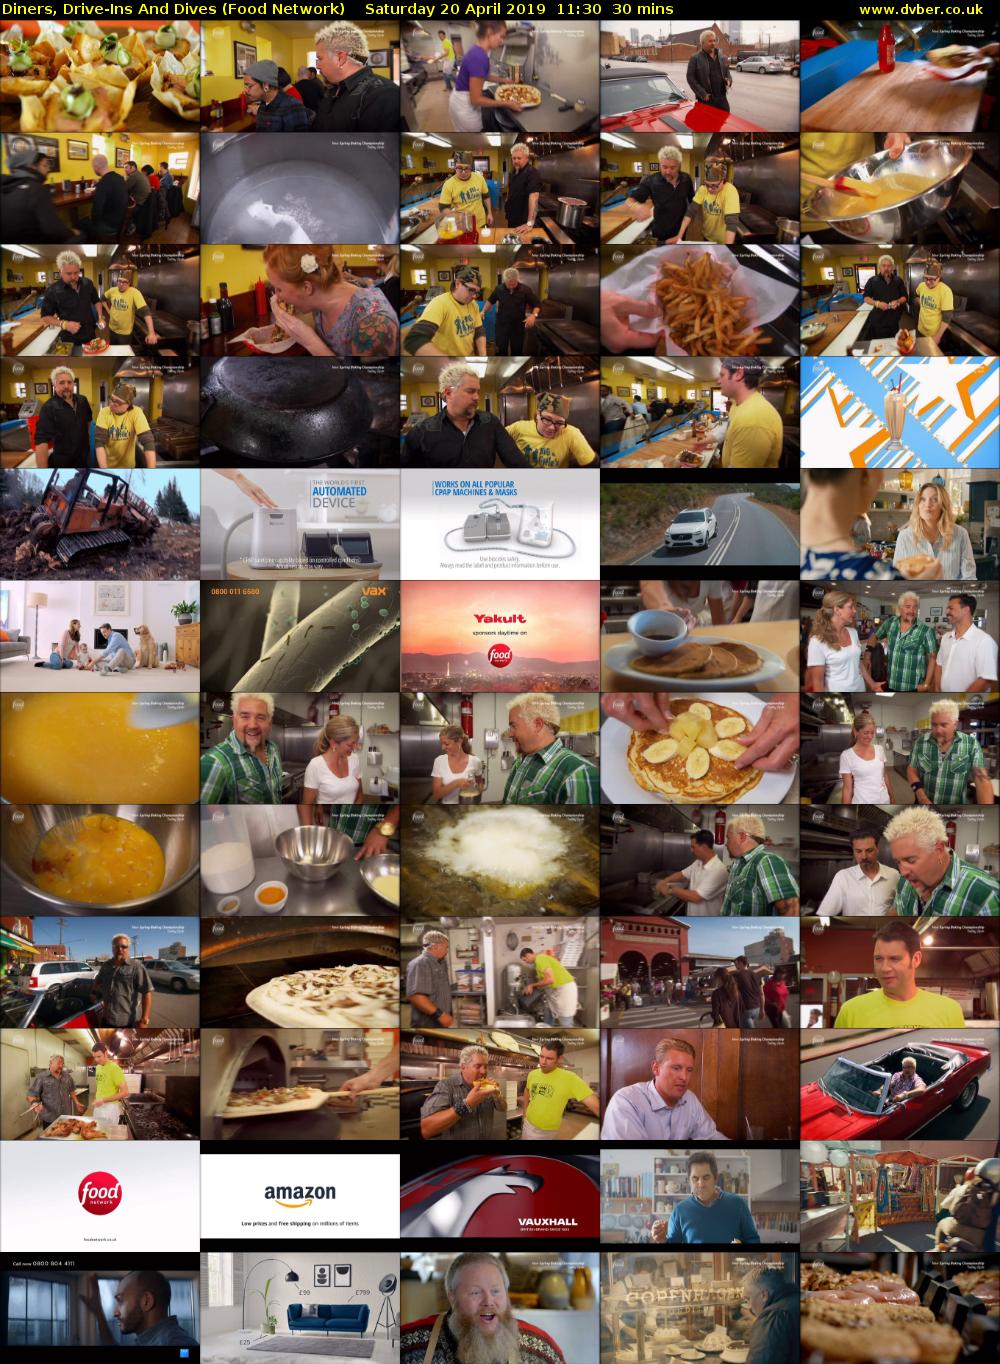 Diners, Drive-Ins And Dives (Food Network) Saturday 20 April 2019 11:30 - 12:00